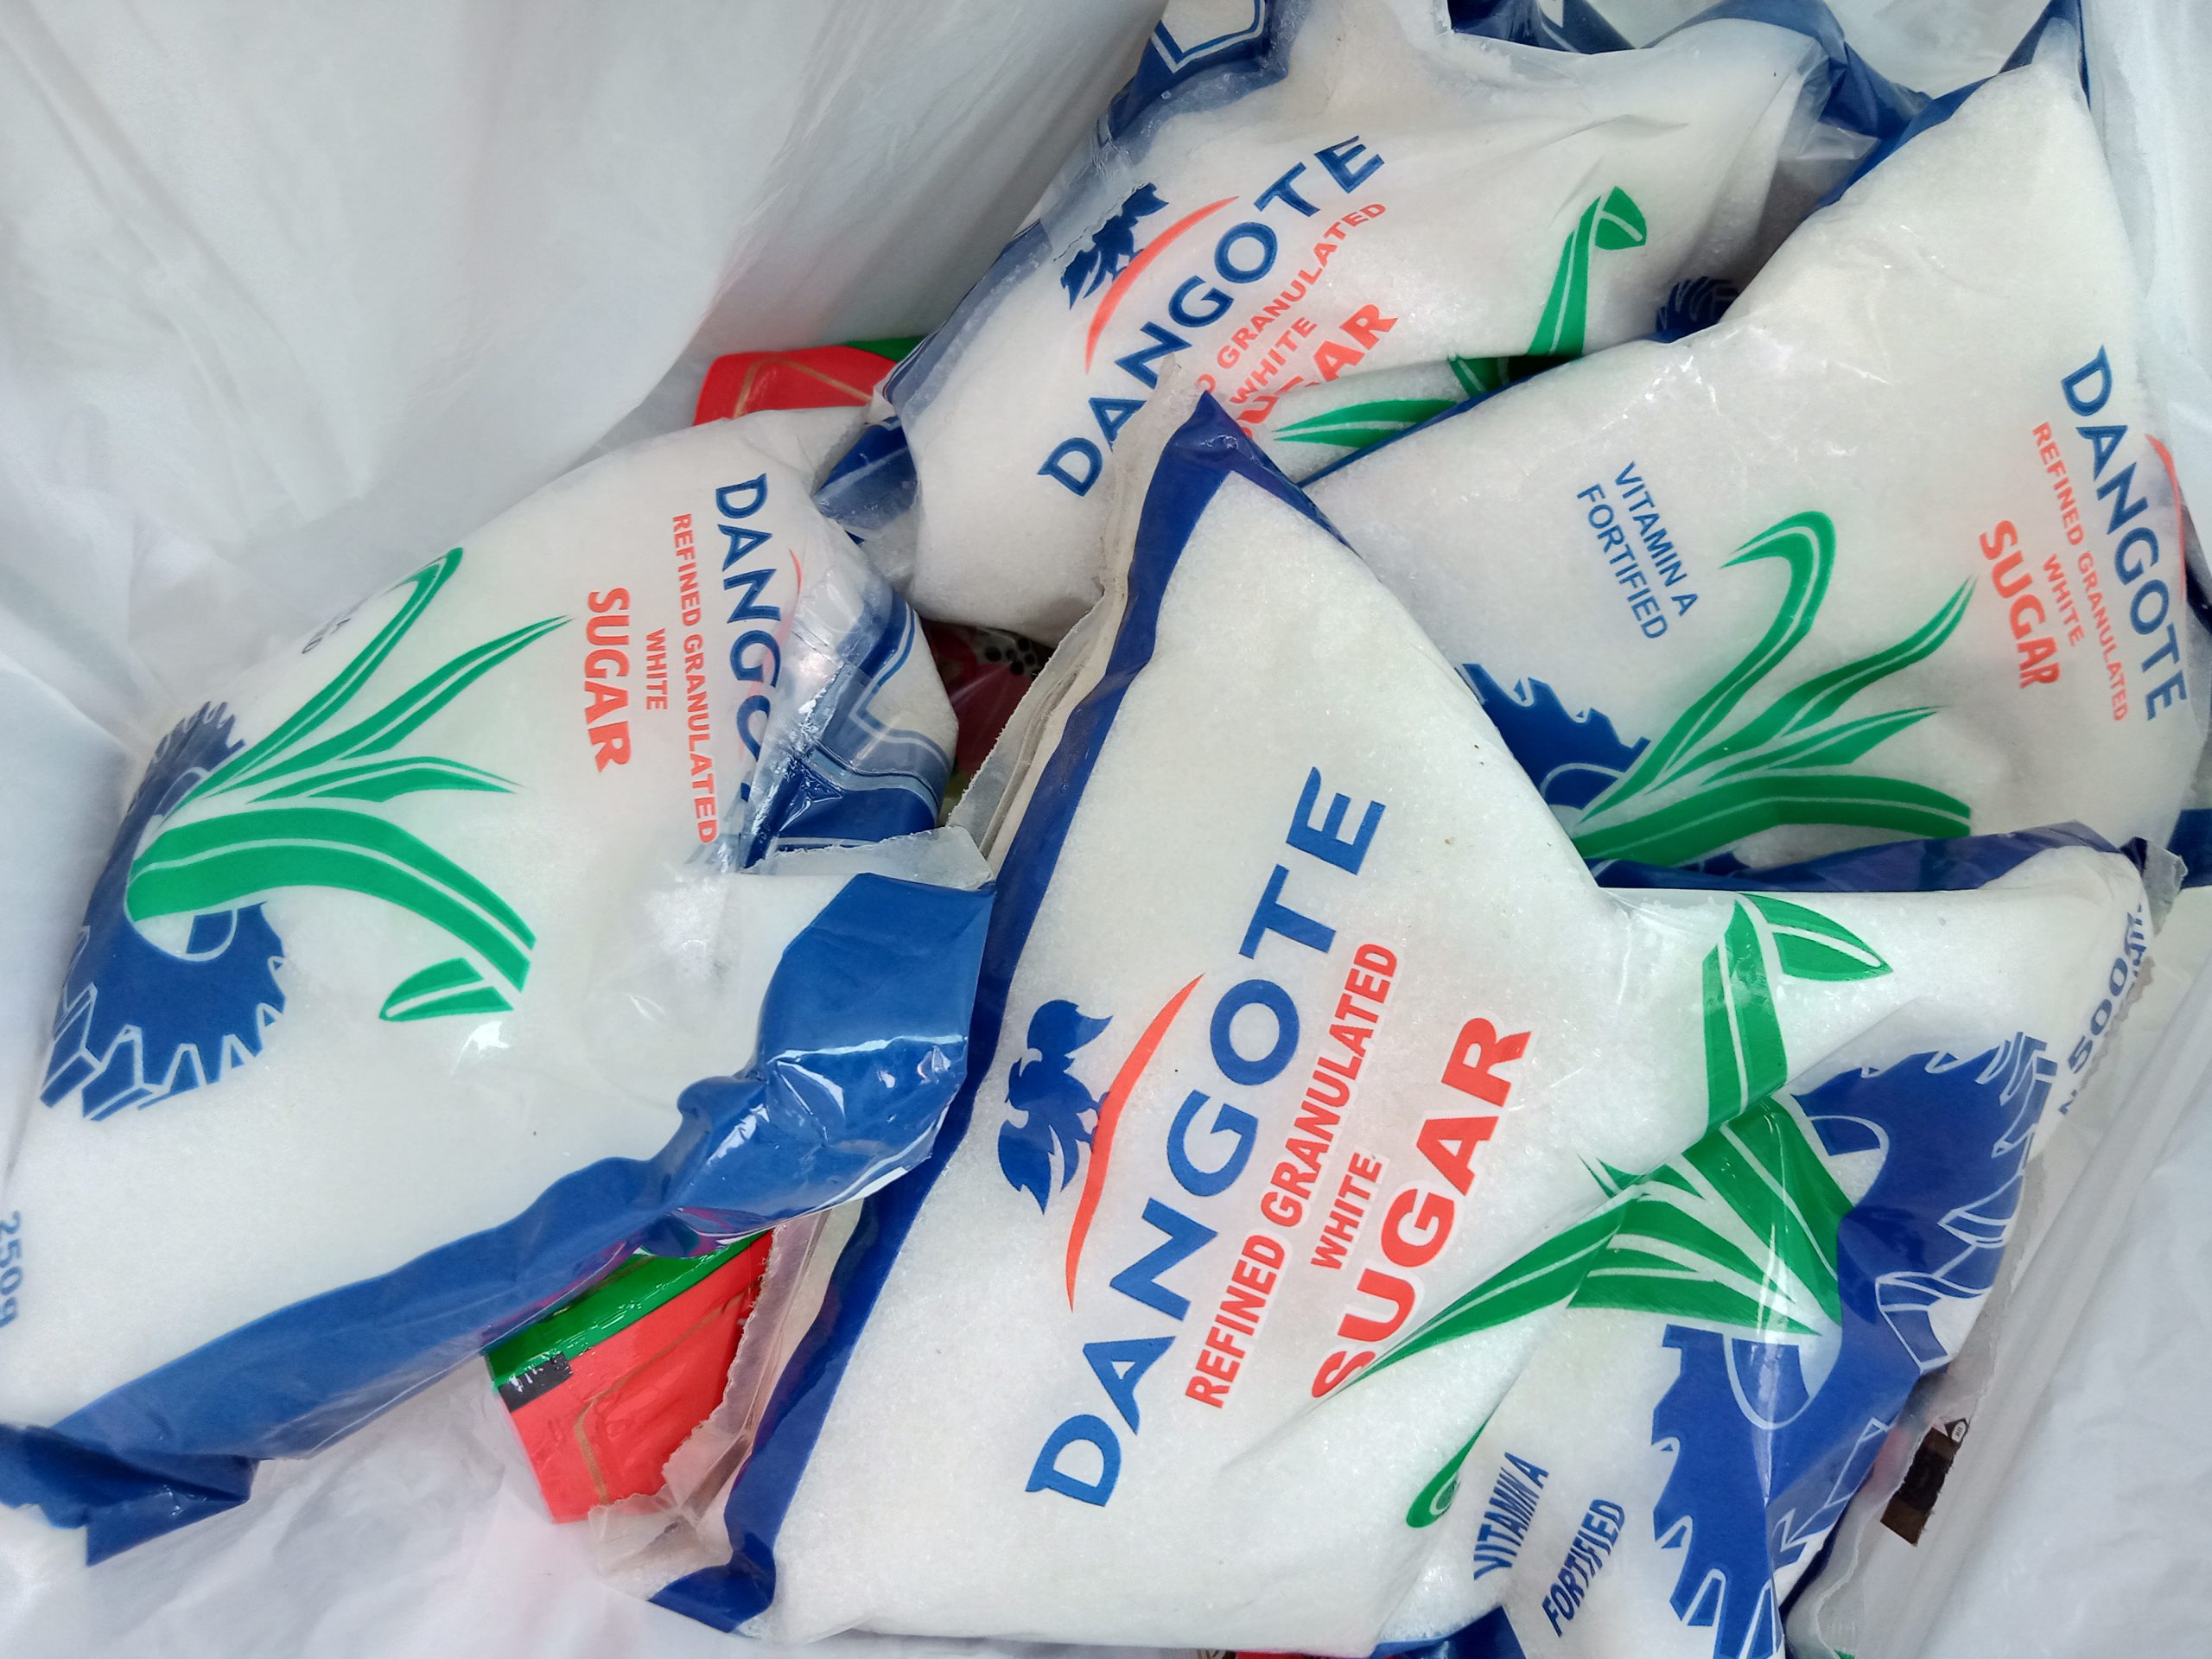 Dangote Sugar Offsets Inflation Stress by Rising Internet Promoting Value